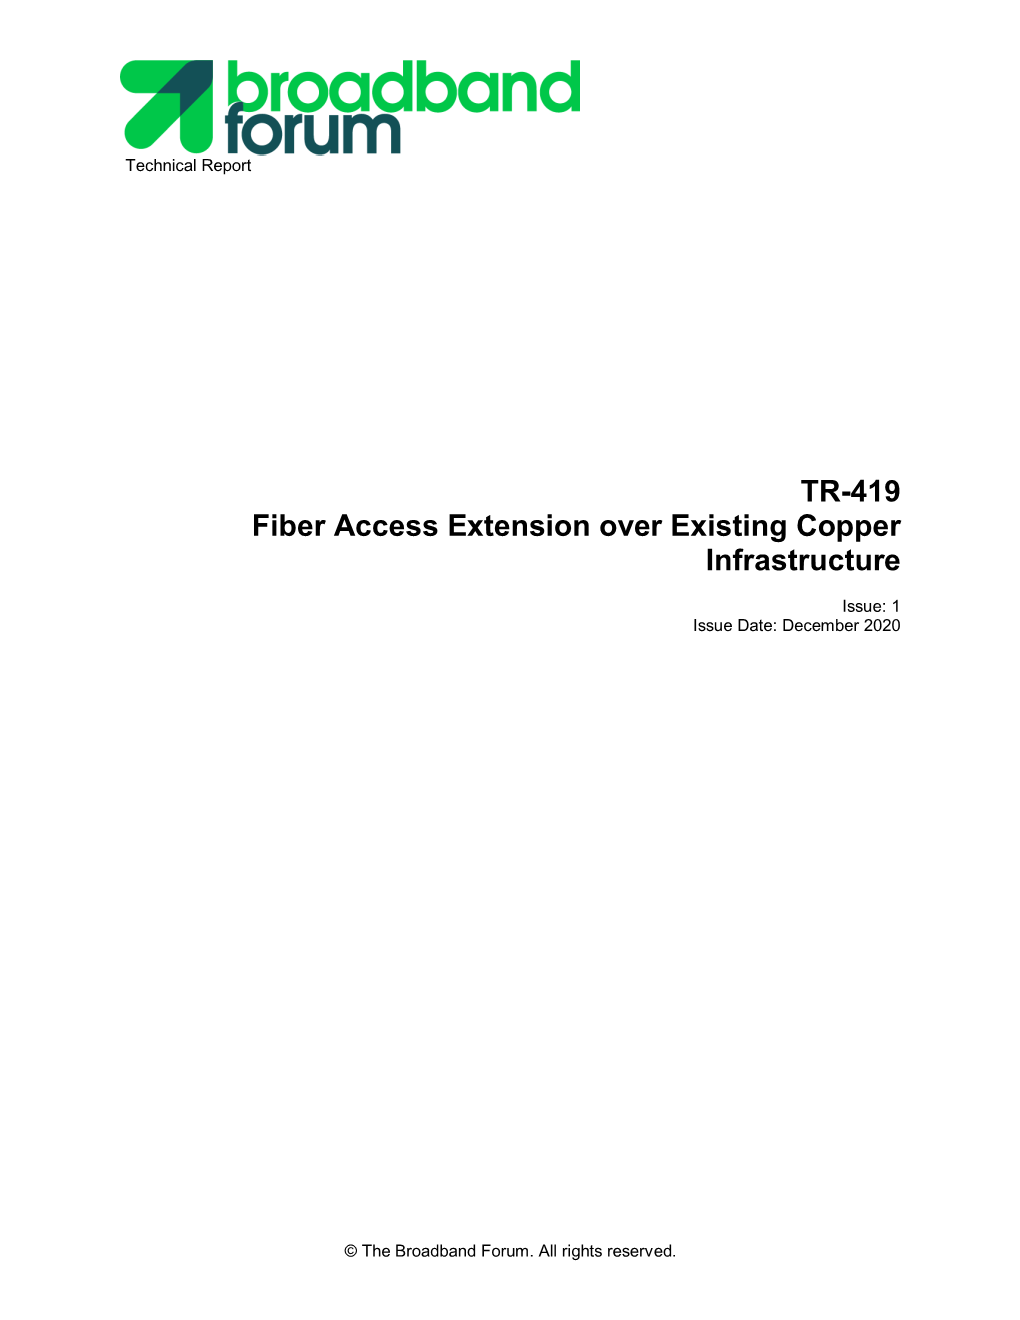 TR-419: Fiber Access Extension Over Existing Copper Infrastructure